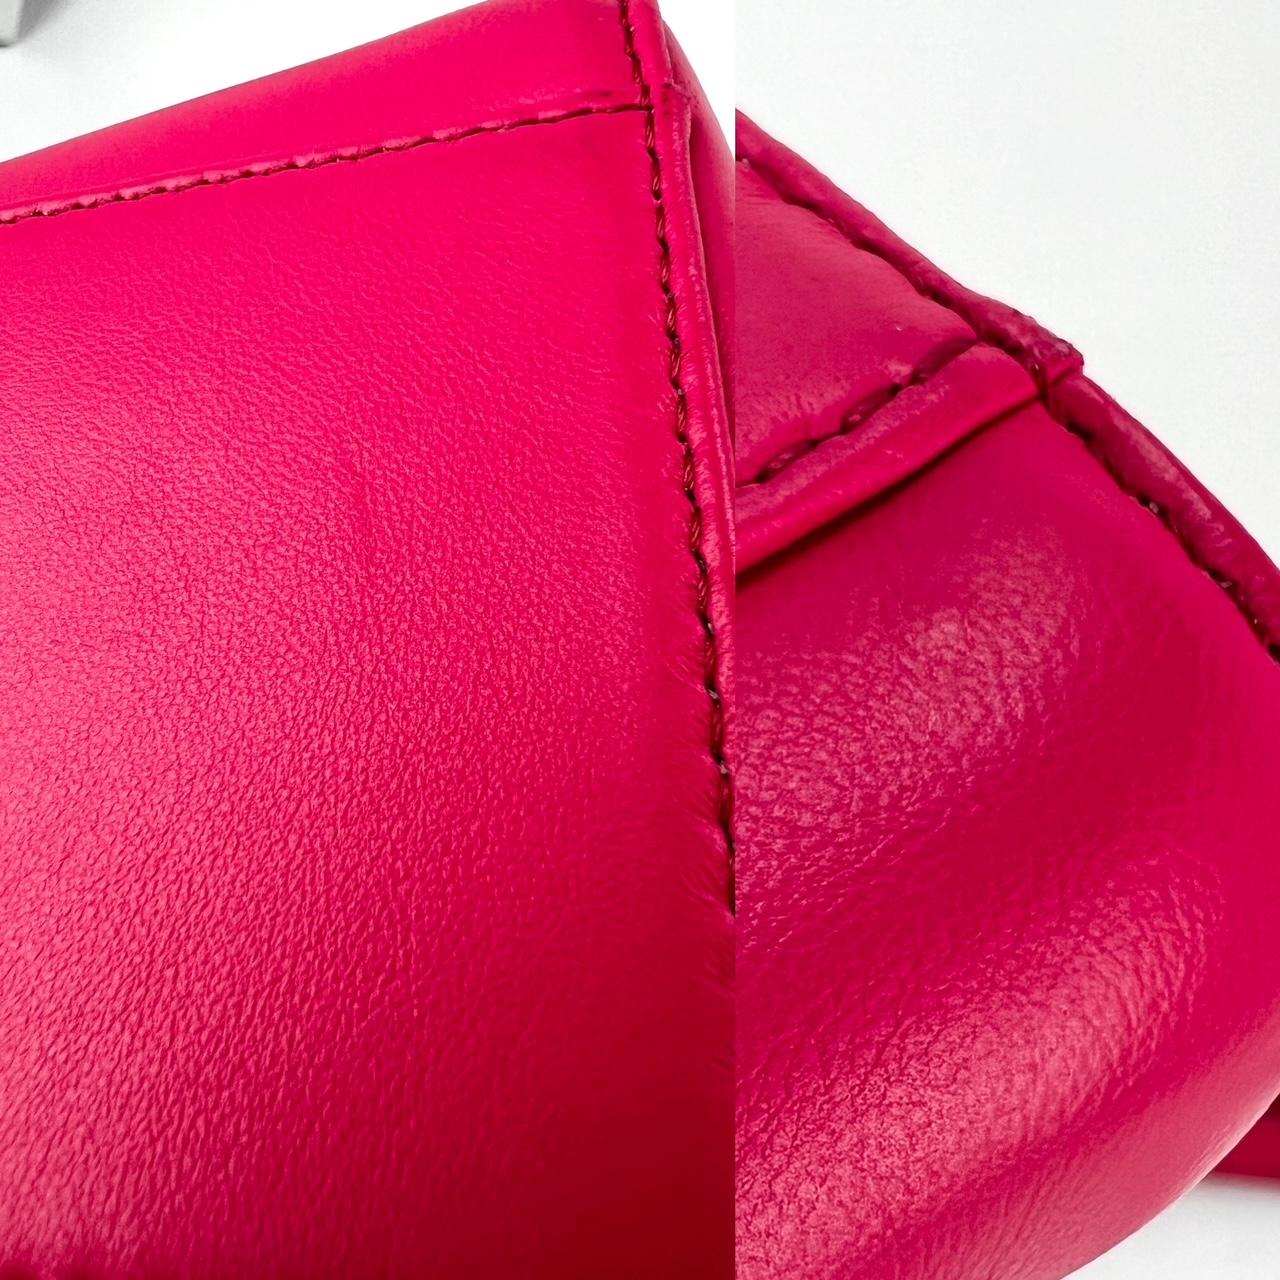 Fendi Mini Peekaboo Pink Leather Hand Shoulder Bag In Excellent Condition For Sale In Freehold, NJ